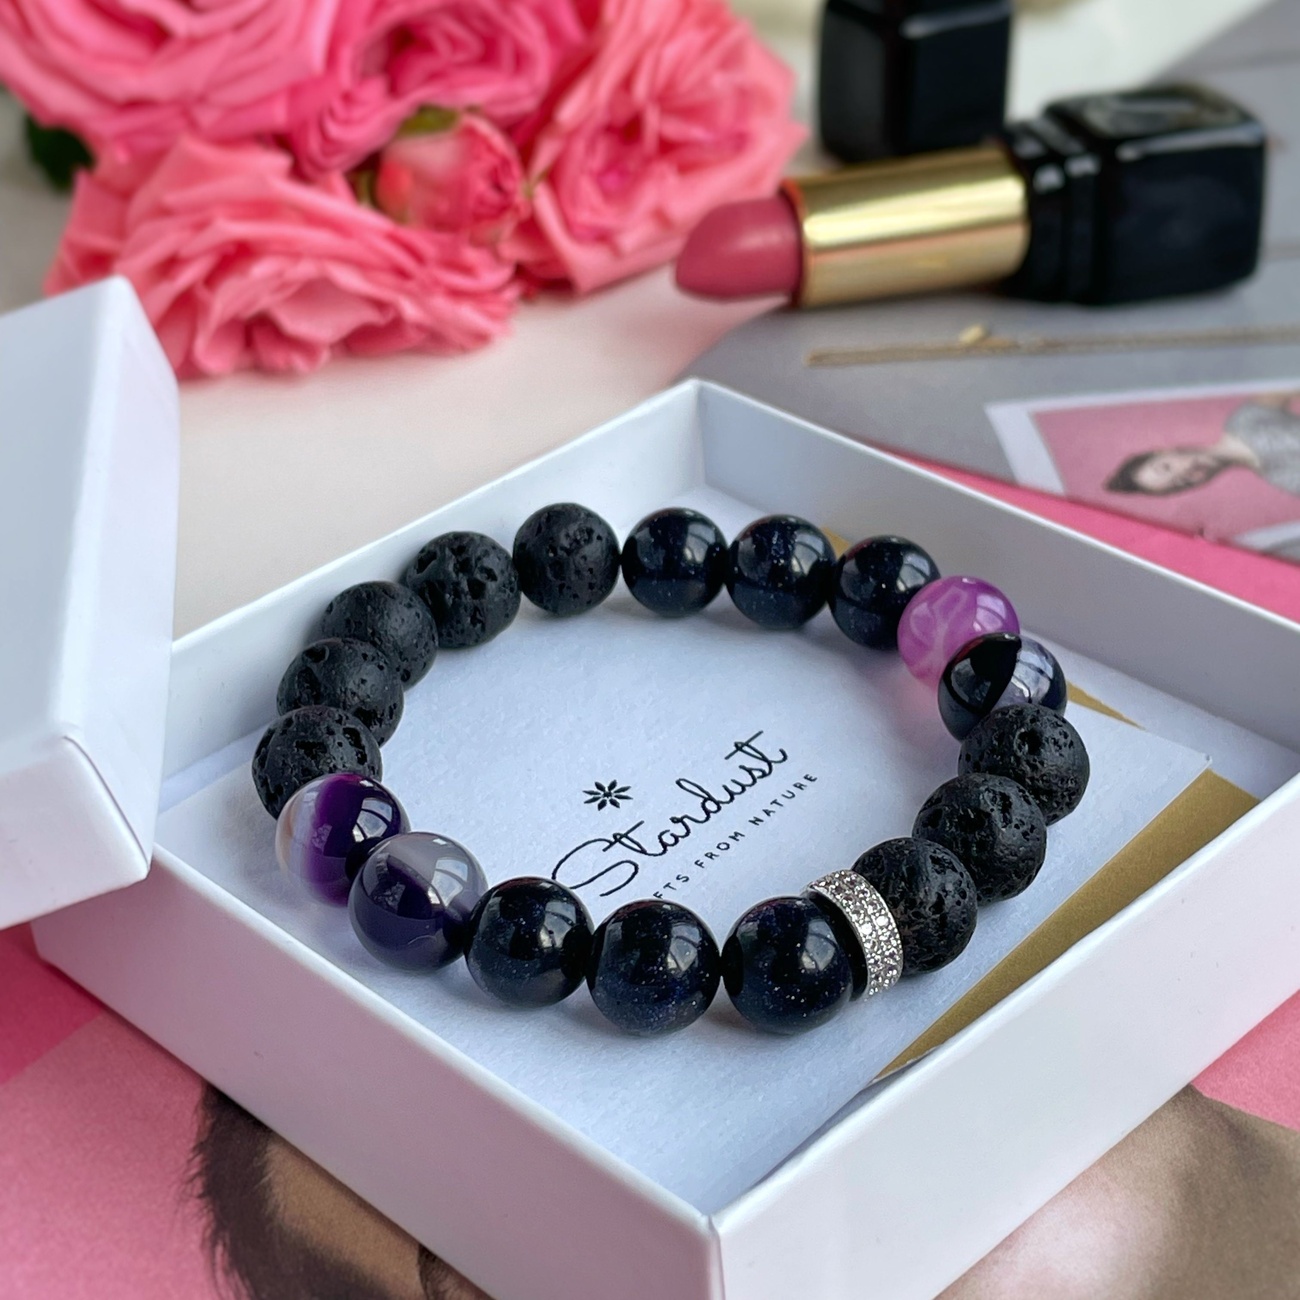 Buy Purple Black Onyx Beads Bracelet Online In India At Discounted Prices